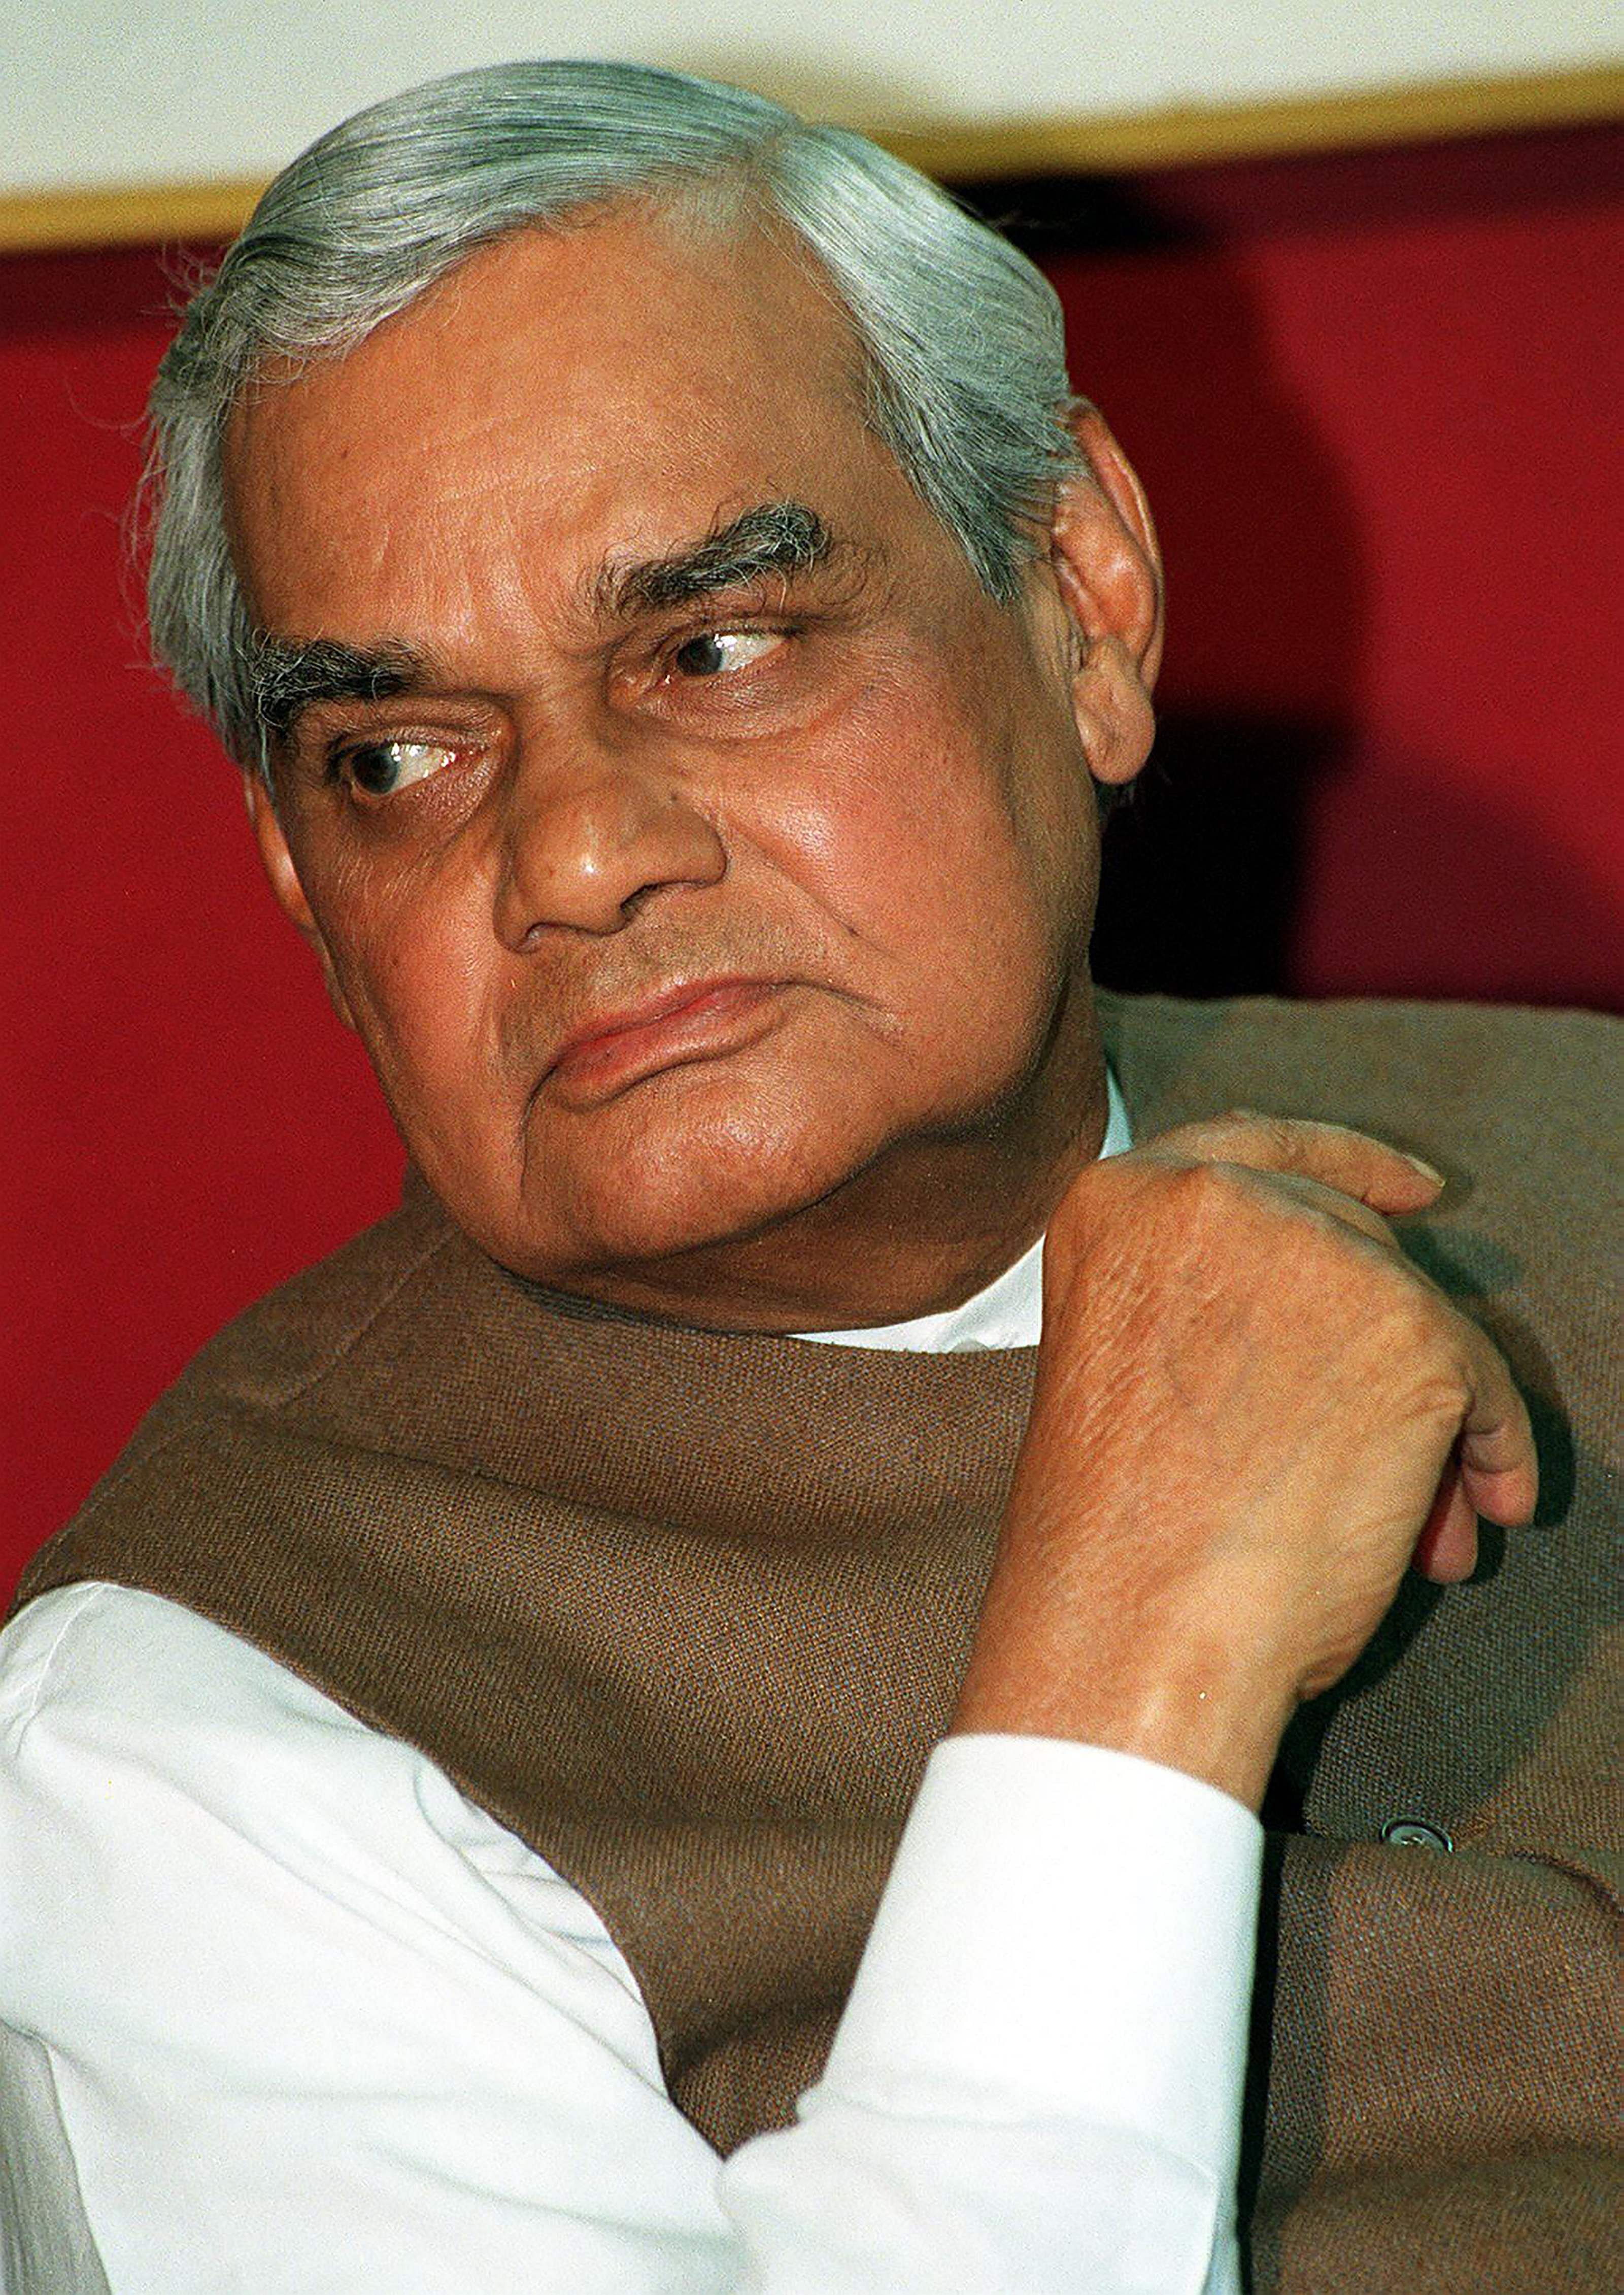 In the brief clip, Vajpayee is seen reciting a poem from a stage. (Credit: AFP File Photo)